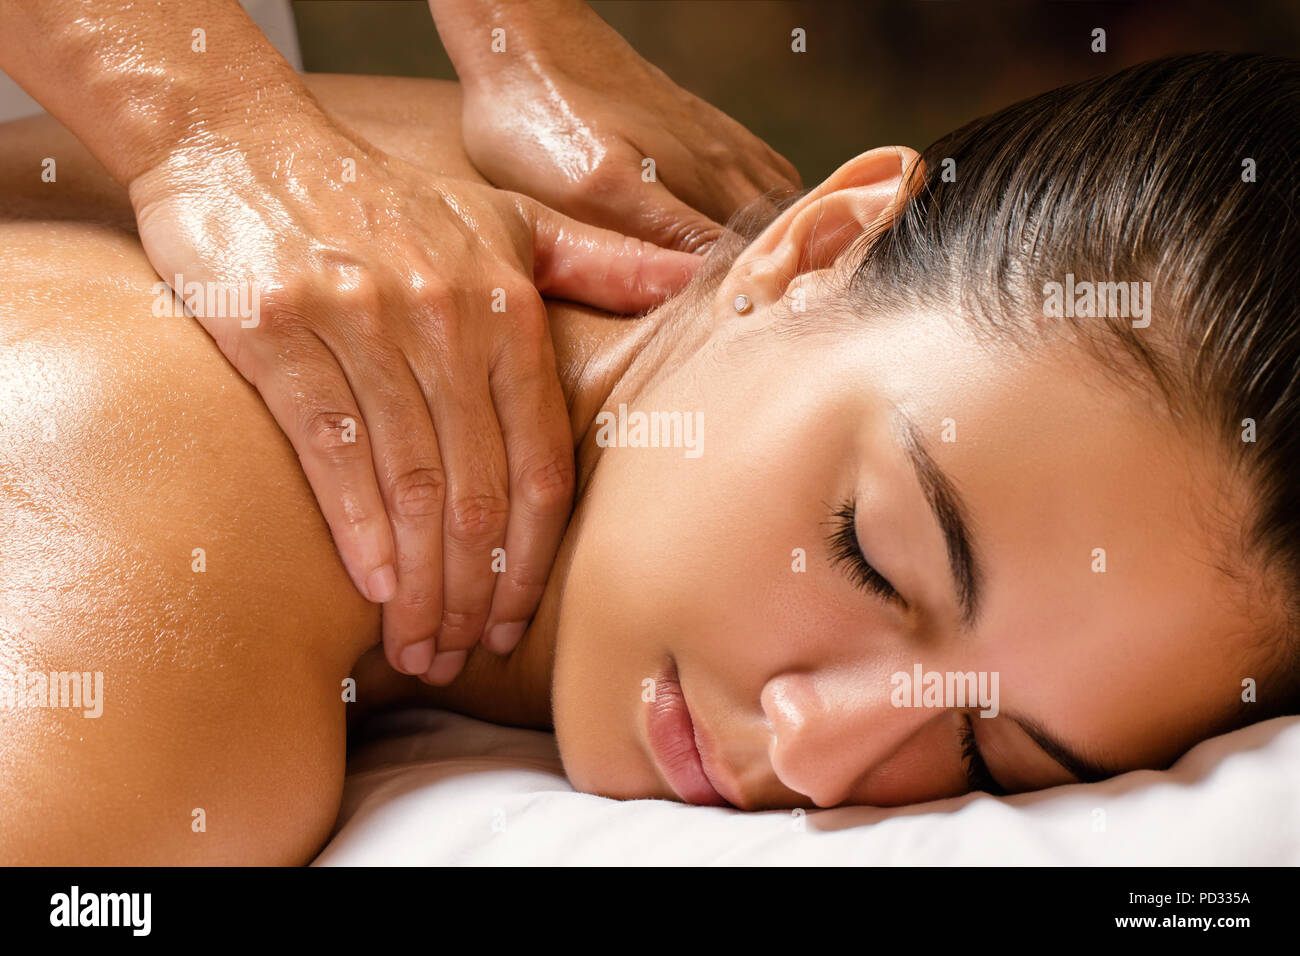 https://c8.alamy.com/comp/PD335A/close-up-of-woman-enjoying-revitalizing-shoulder-and-neck-massage-in-spa-PD335A.jpg